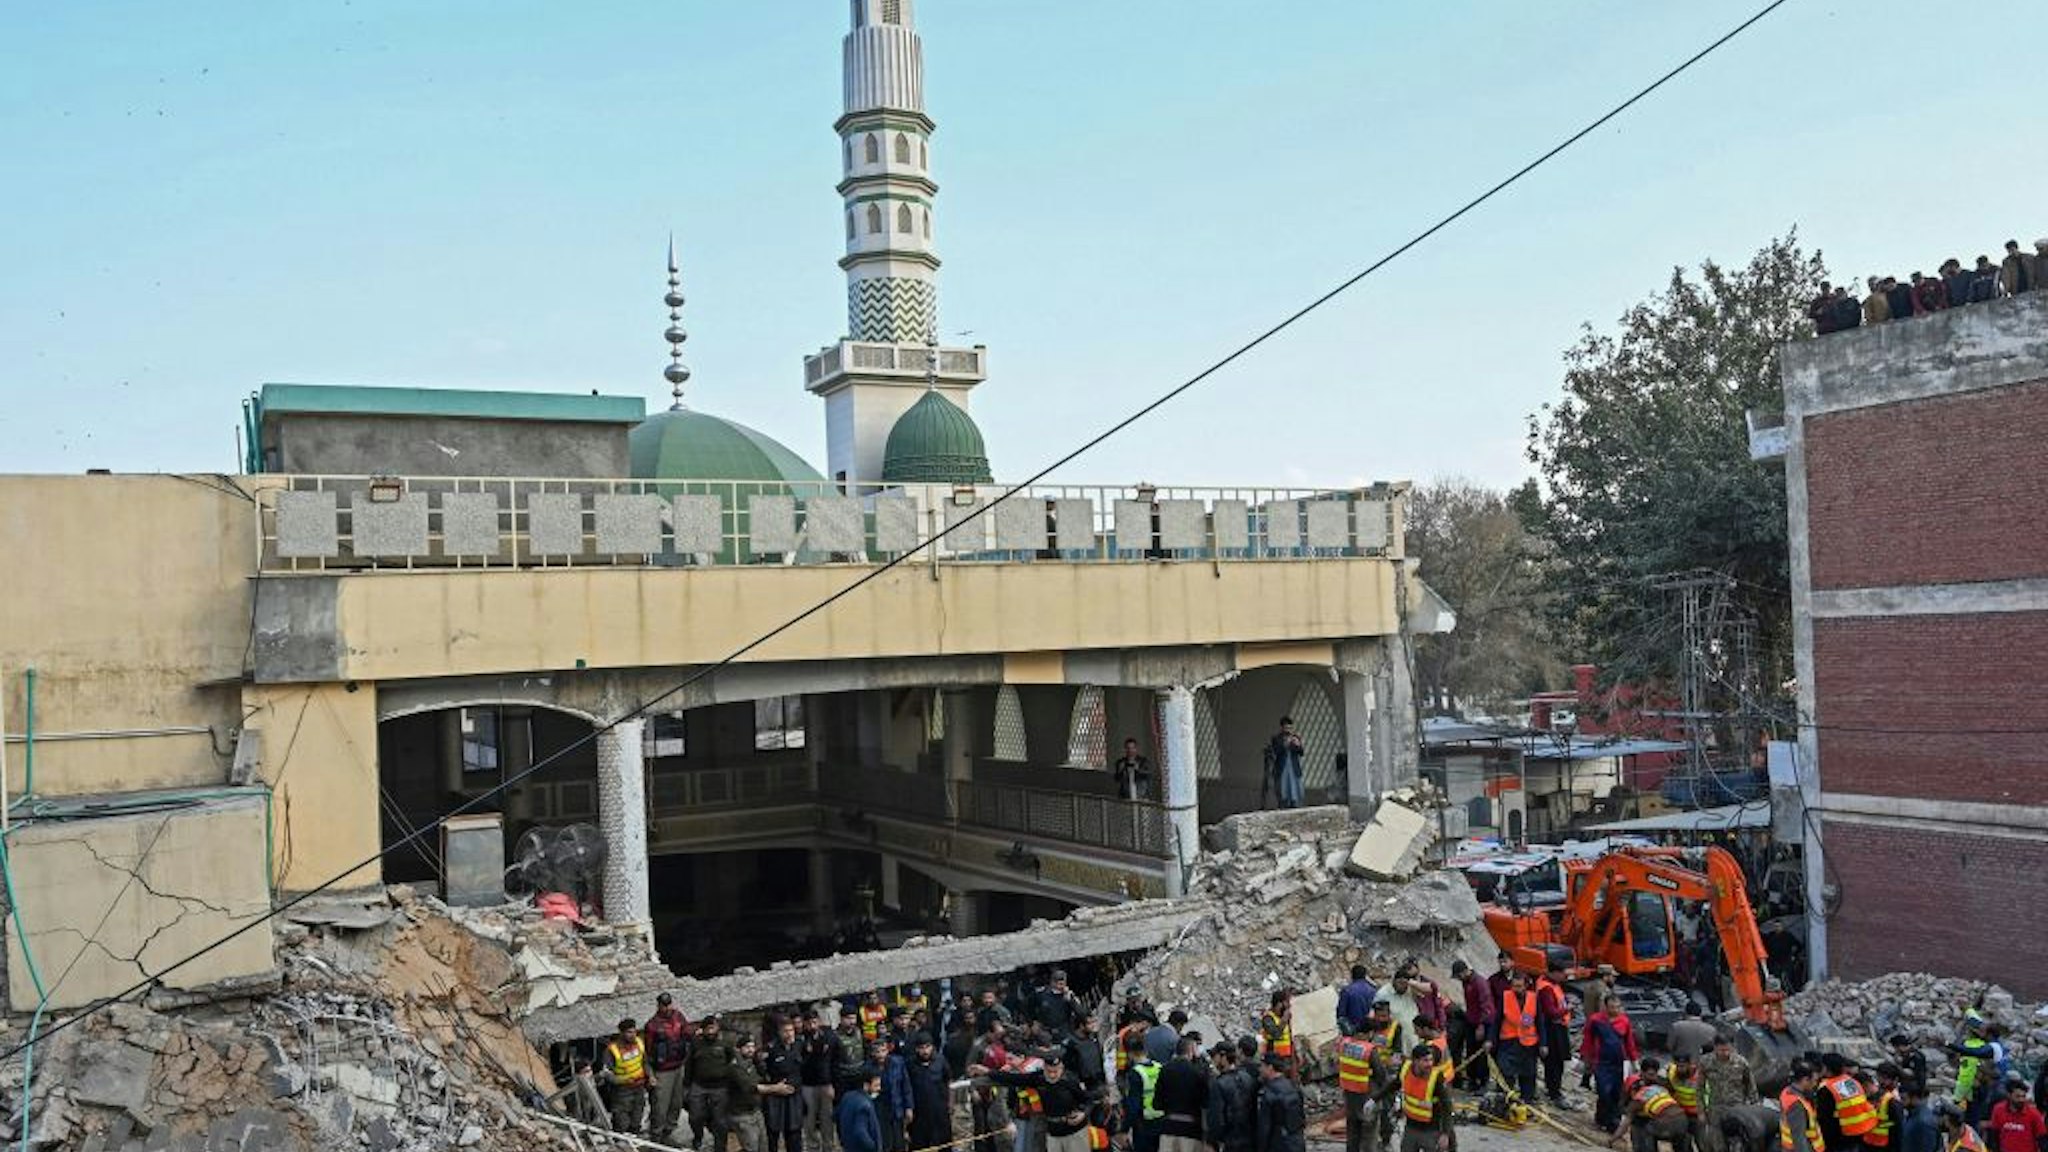 Security personnel and rescue workers prepare to search for the blast victims in the debris of a damaged mosque inside the police headquarters in Peshawar on January 30, 2023.